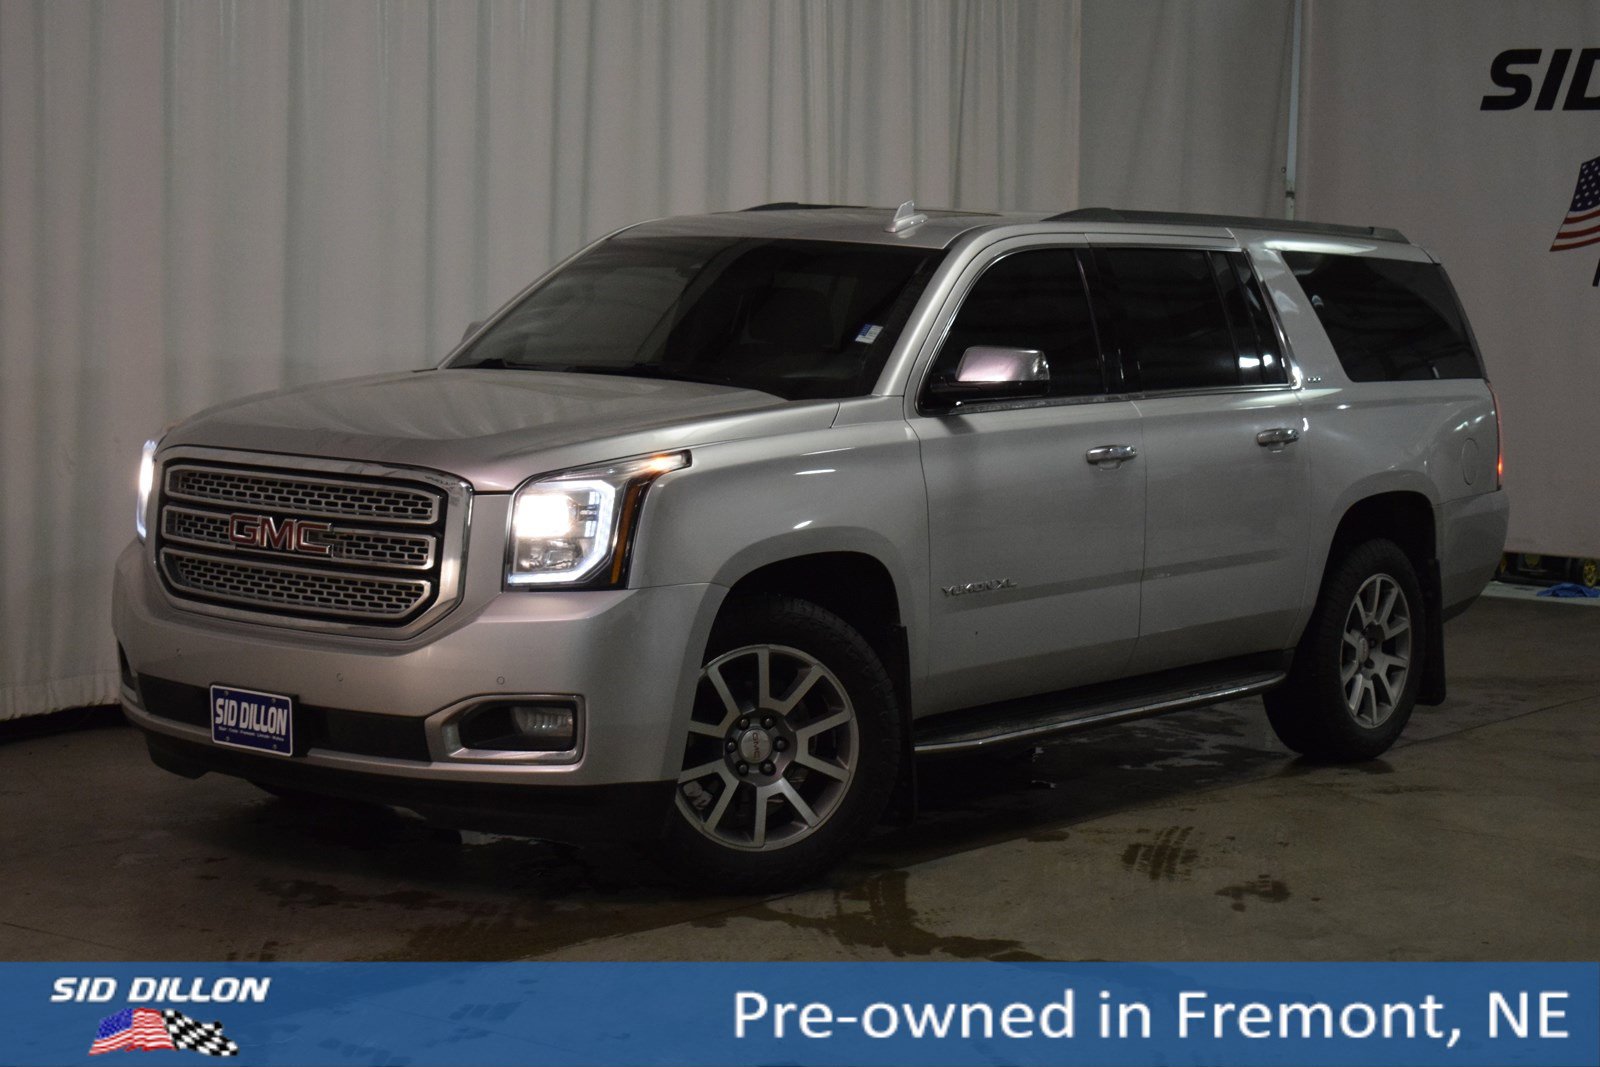 Pre-Owned 2017 GMC Yukon XL SLT SUV in Lincoln #2U22960 | Sid Dillon Buick  of Lincoln